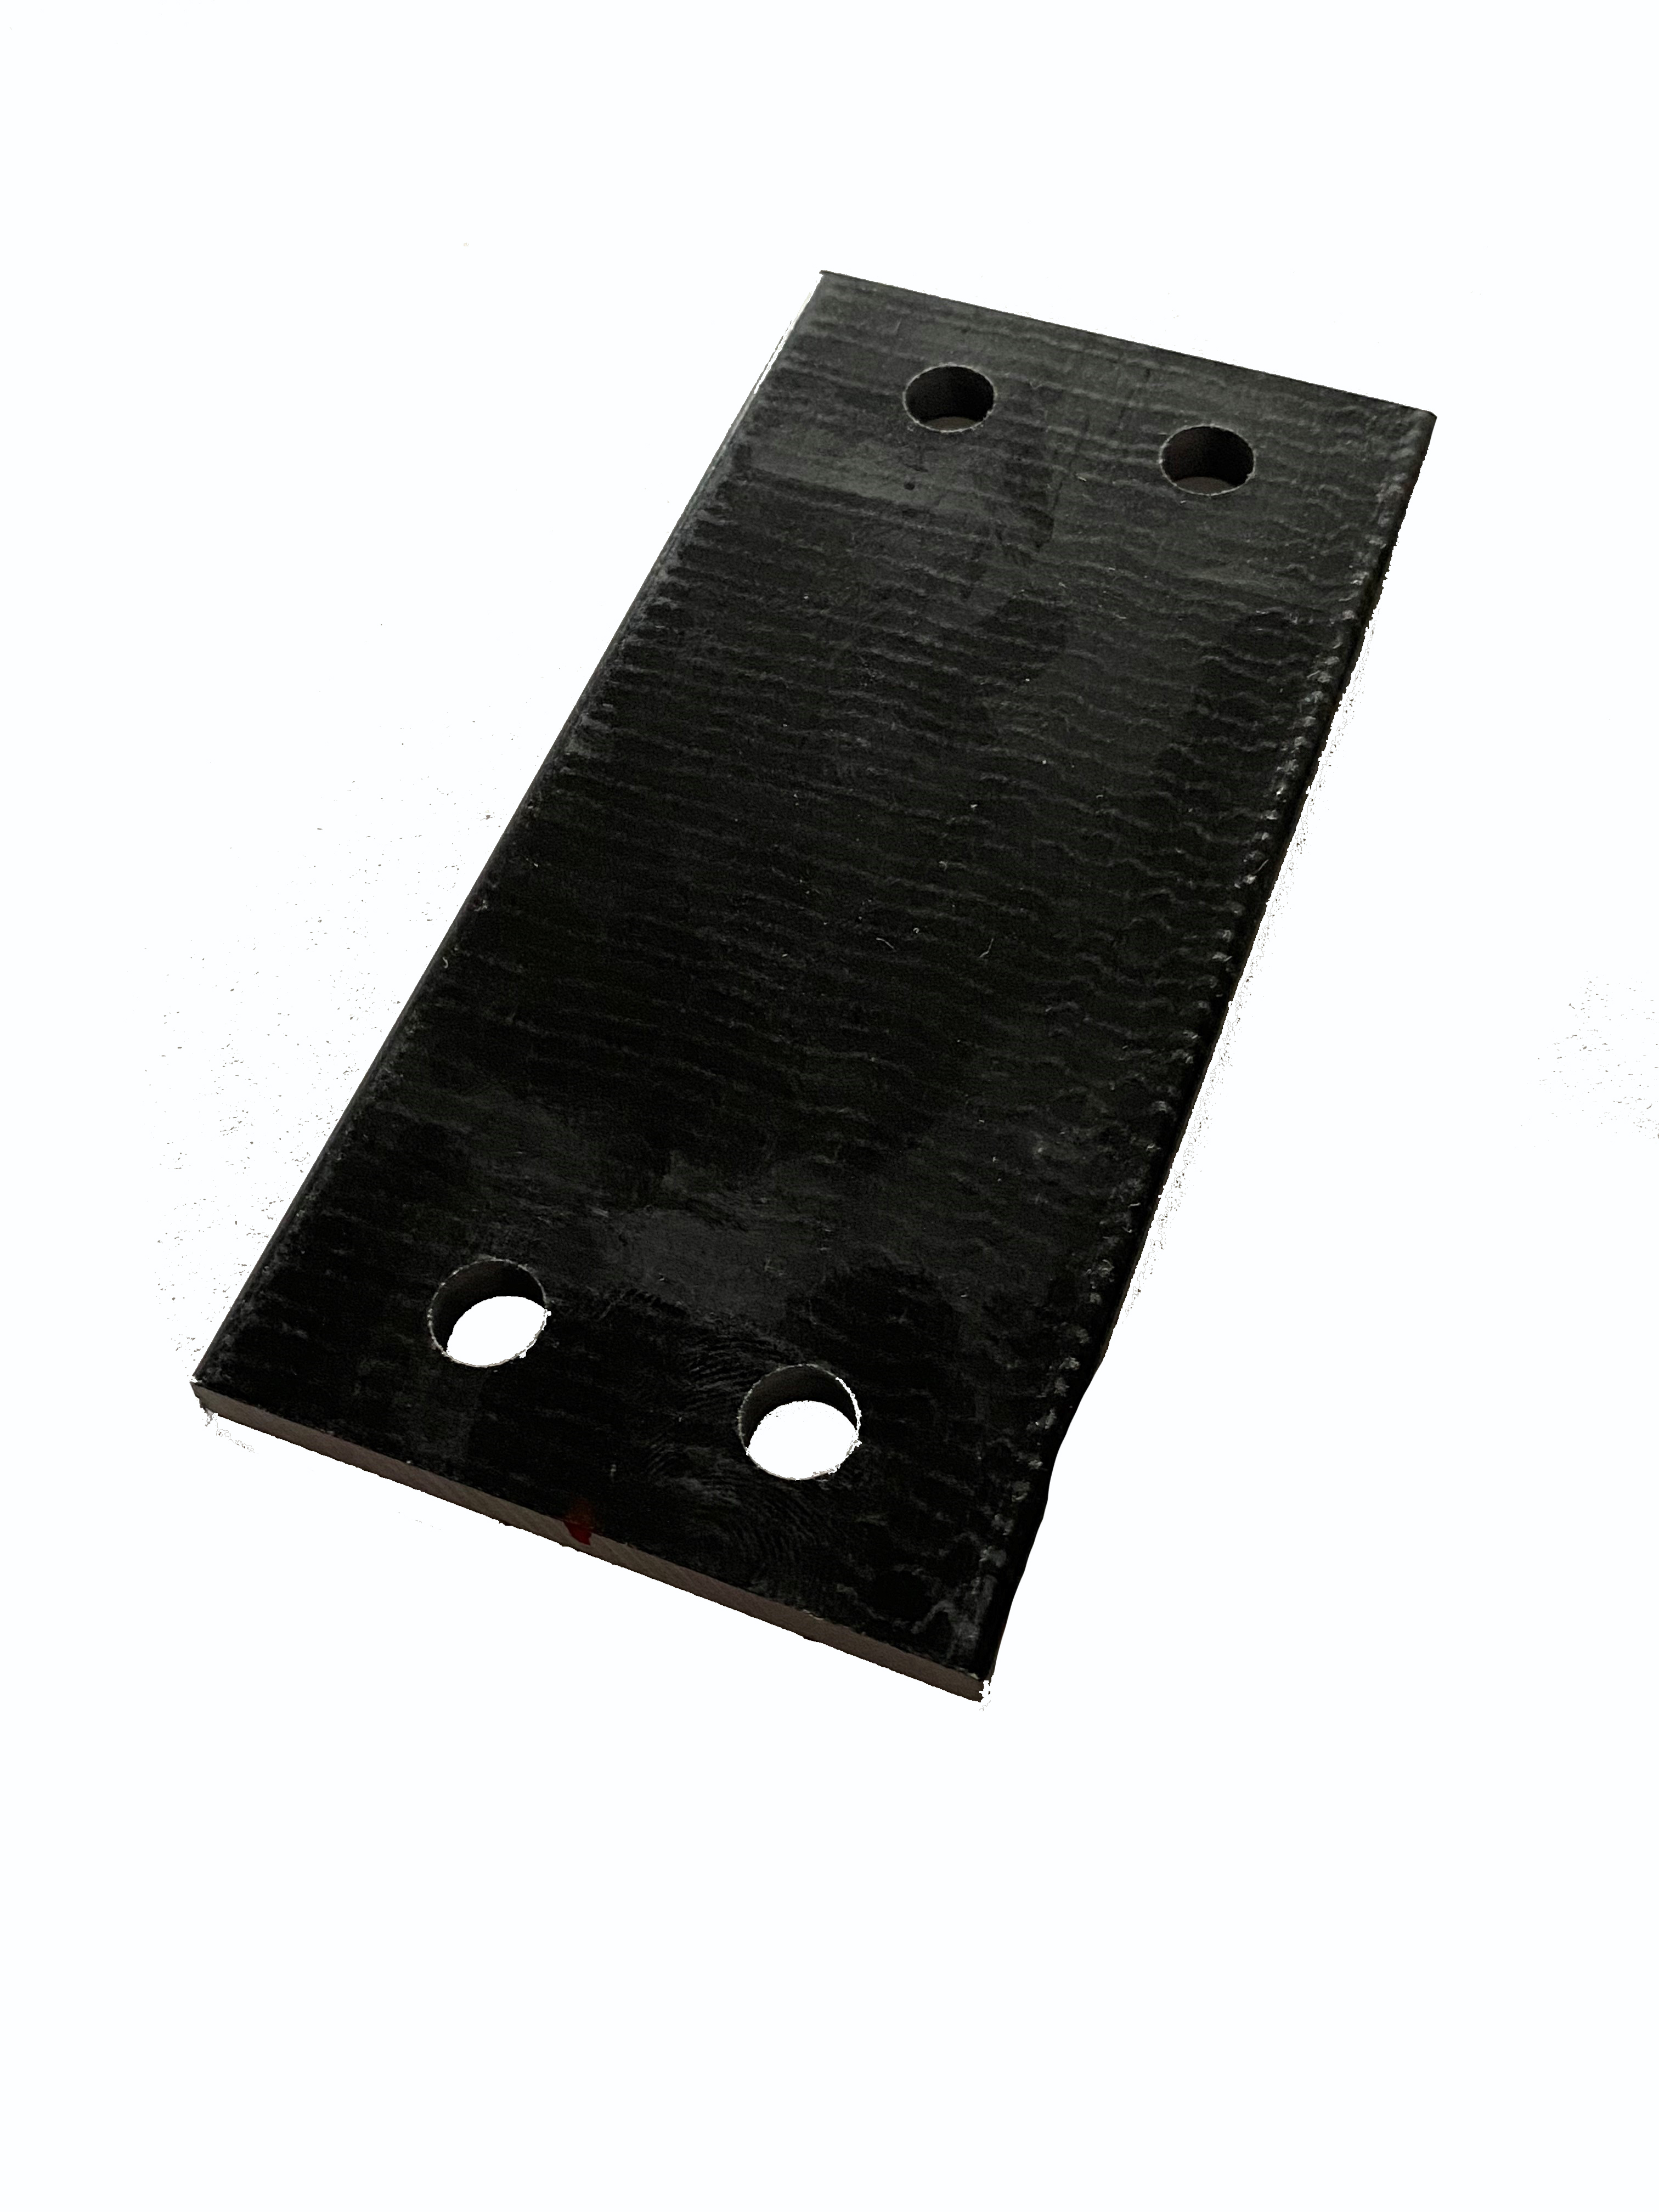 spring plate product image